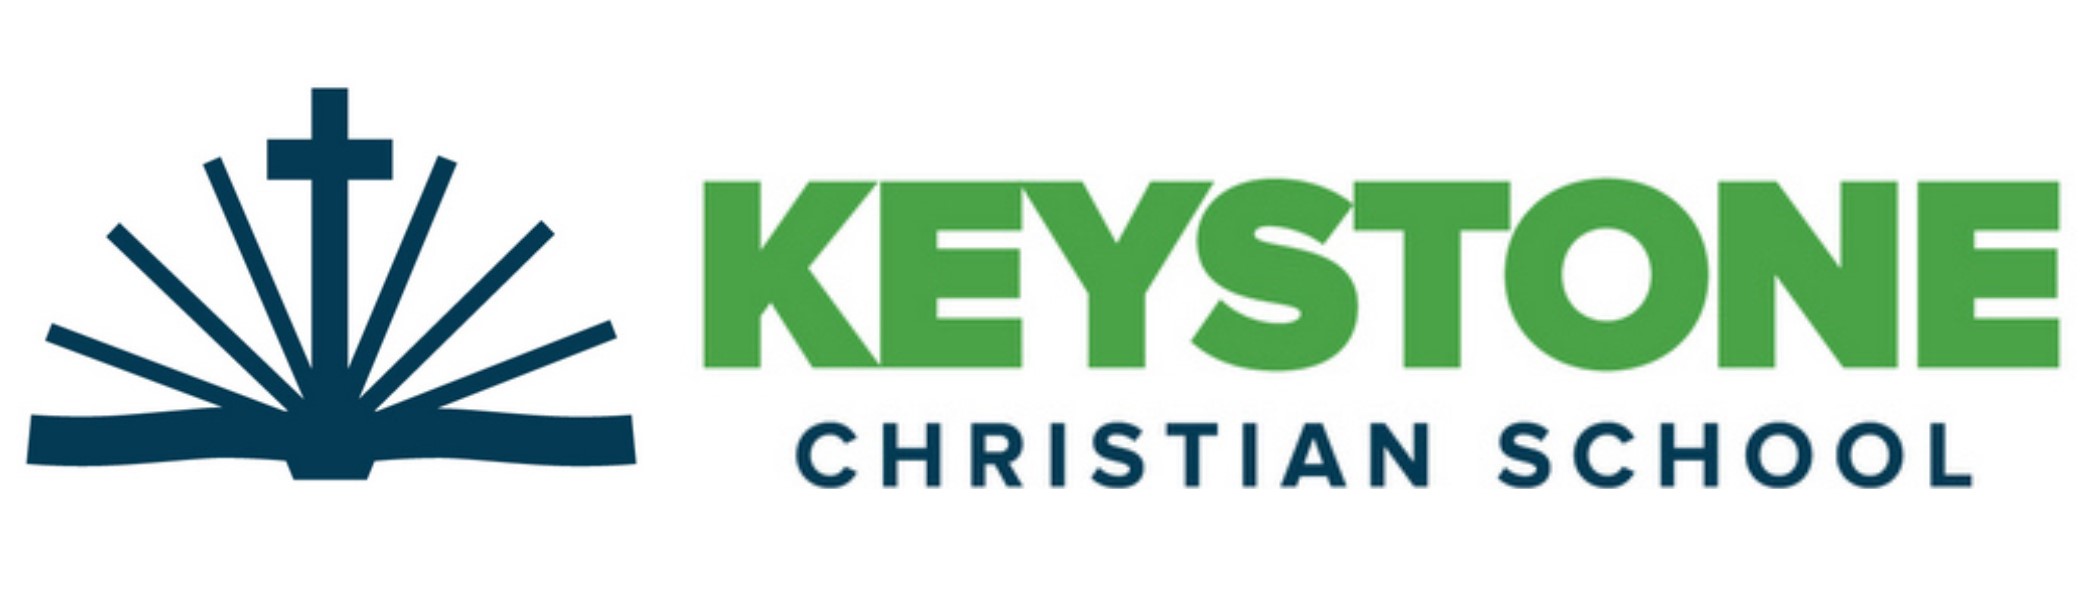 Keystone Christian Schools Partnering With Parents To Disciple